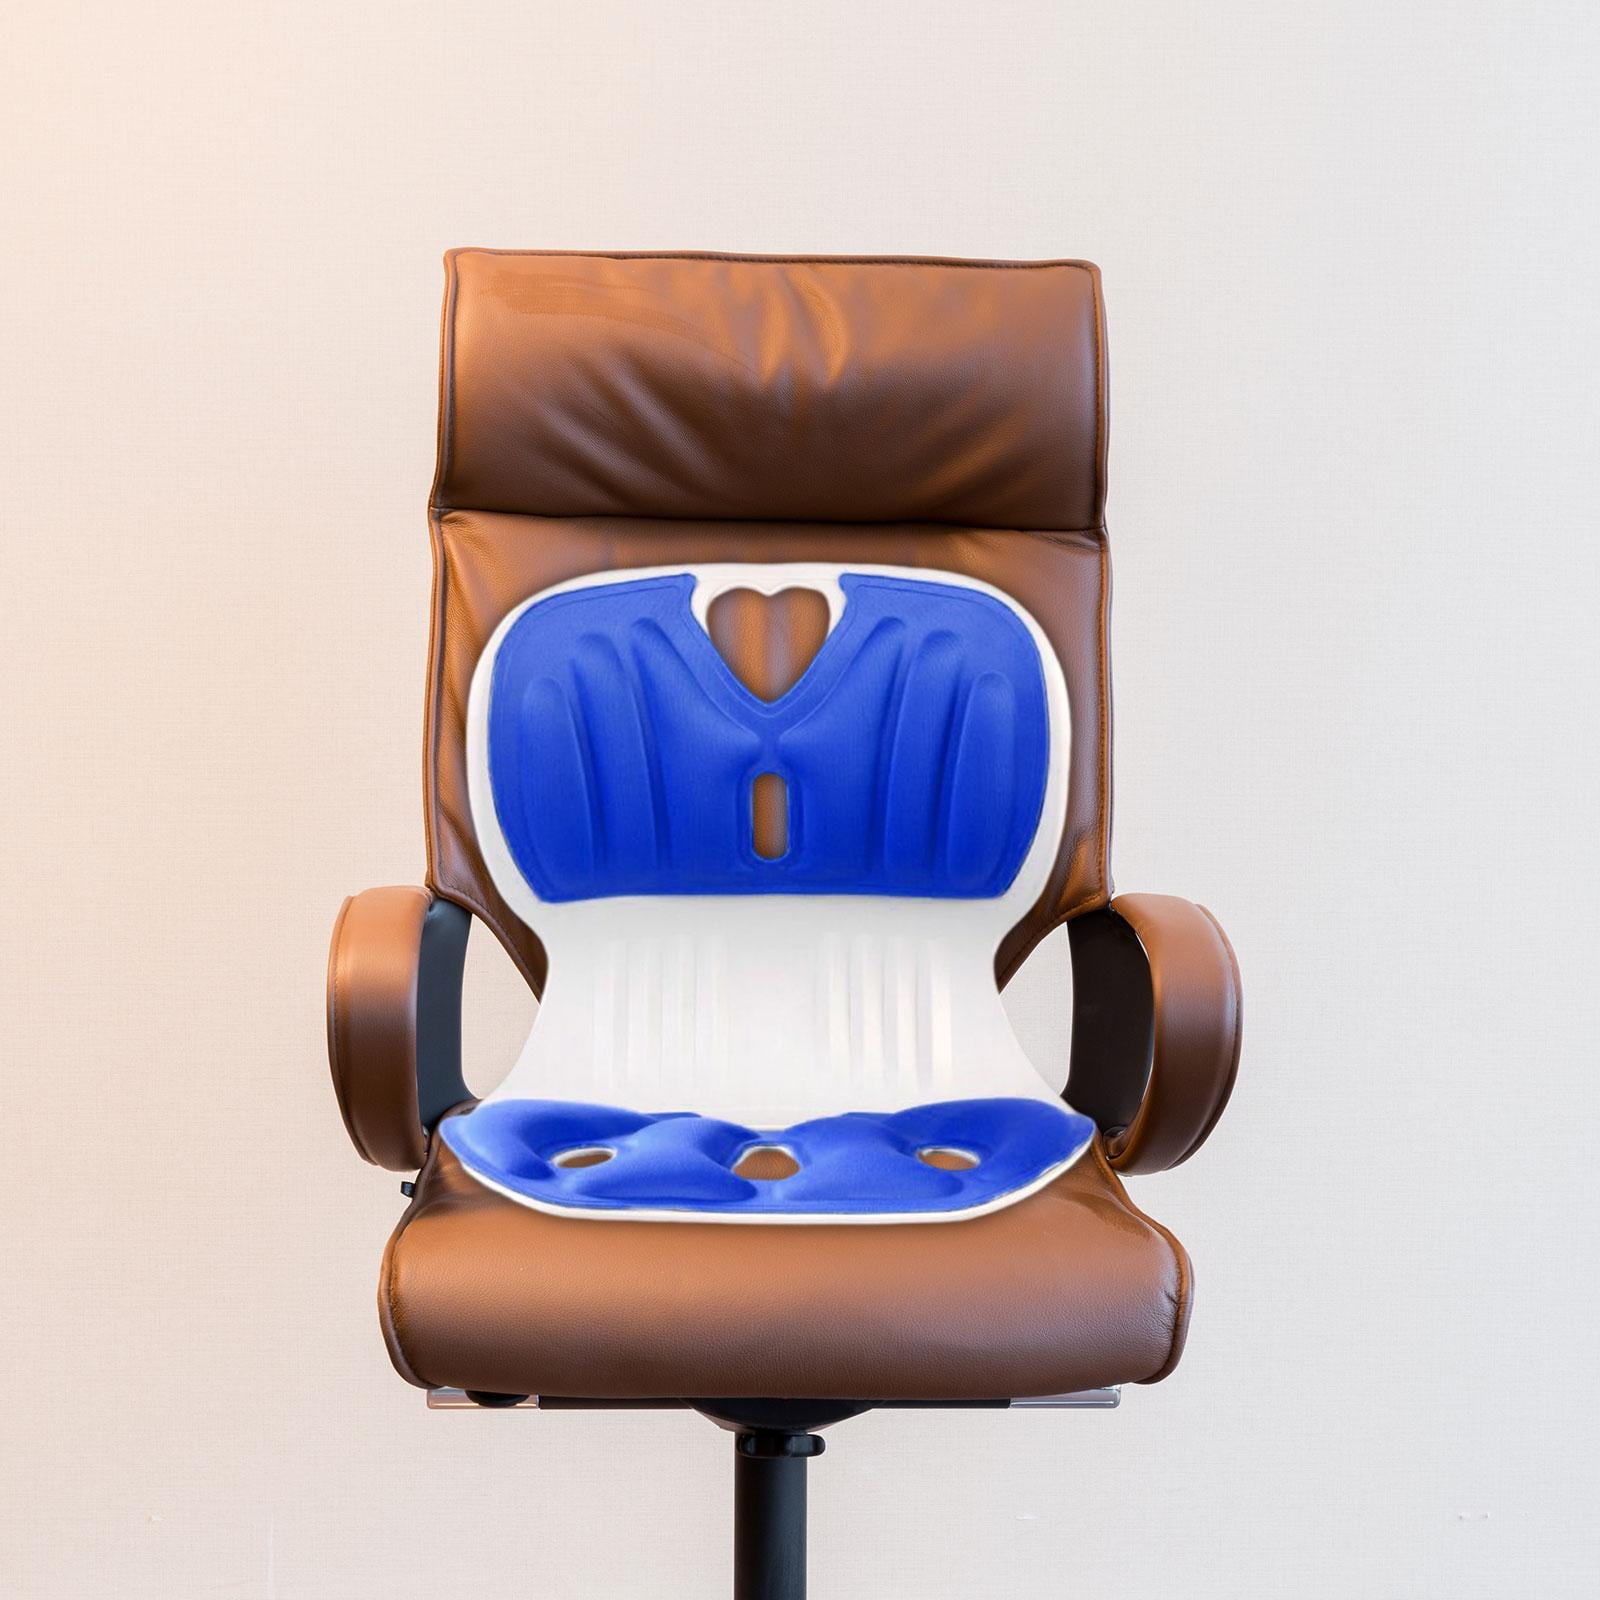 Guest Blog: Why Choose This Posture Correcting and Ergonomic Chair